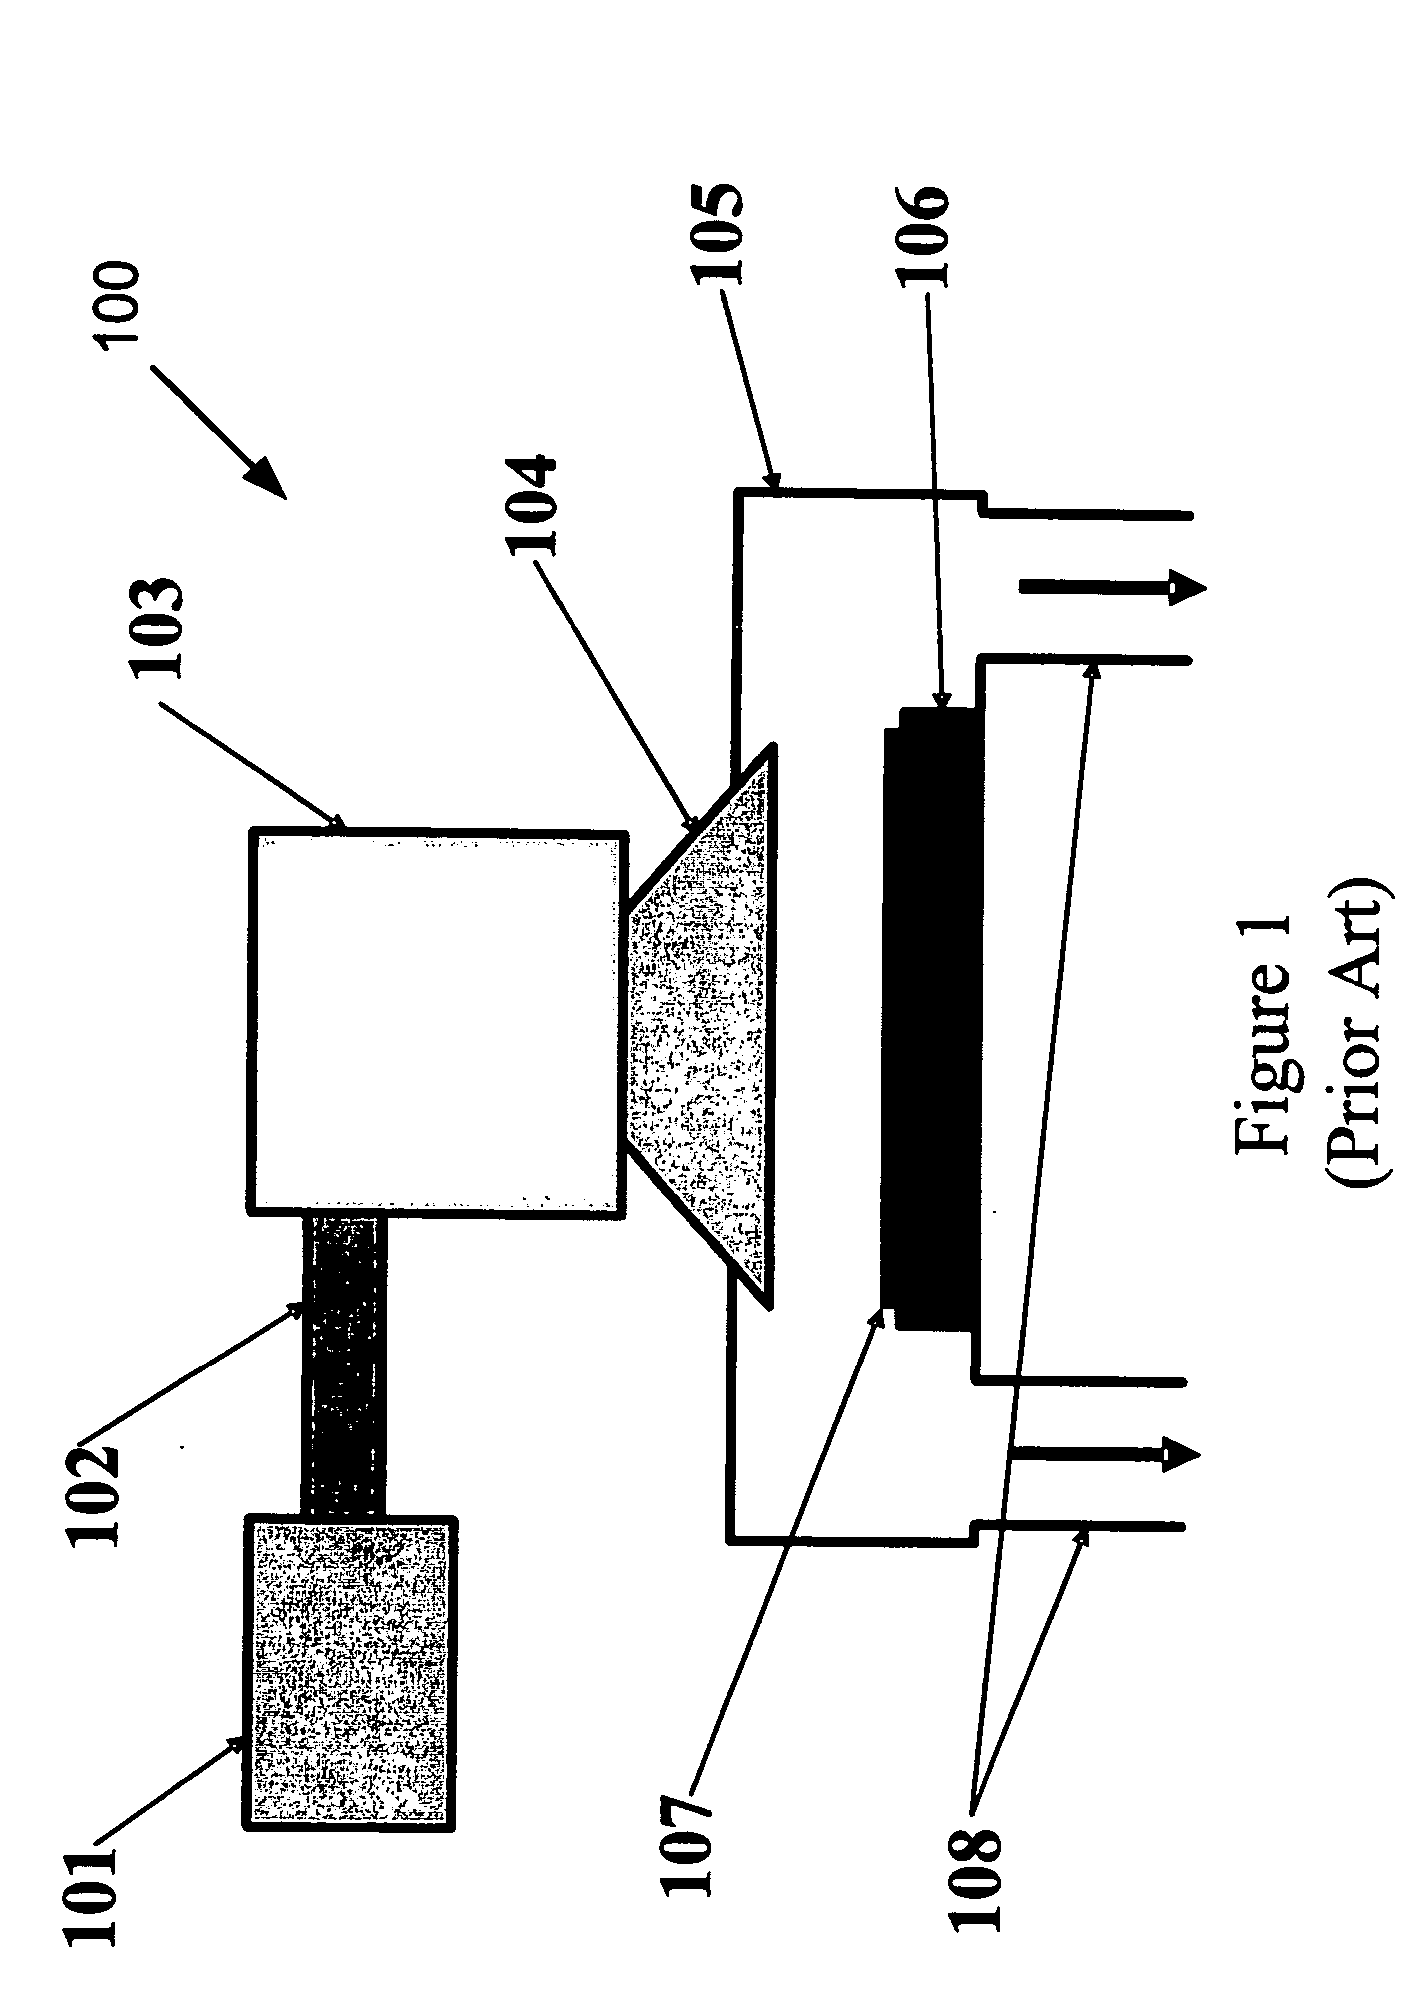 System and method for removal of photoresist in transistor fabrication for integrated circuit manufacturing